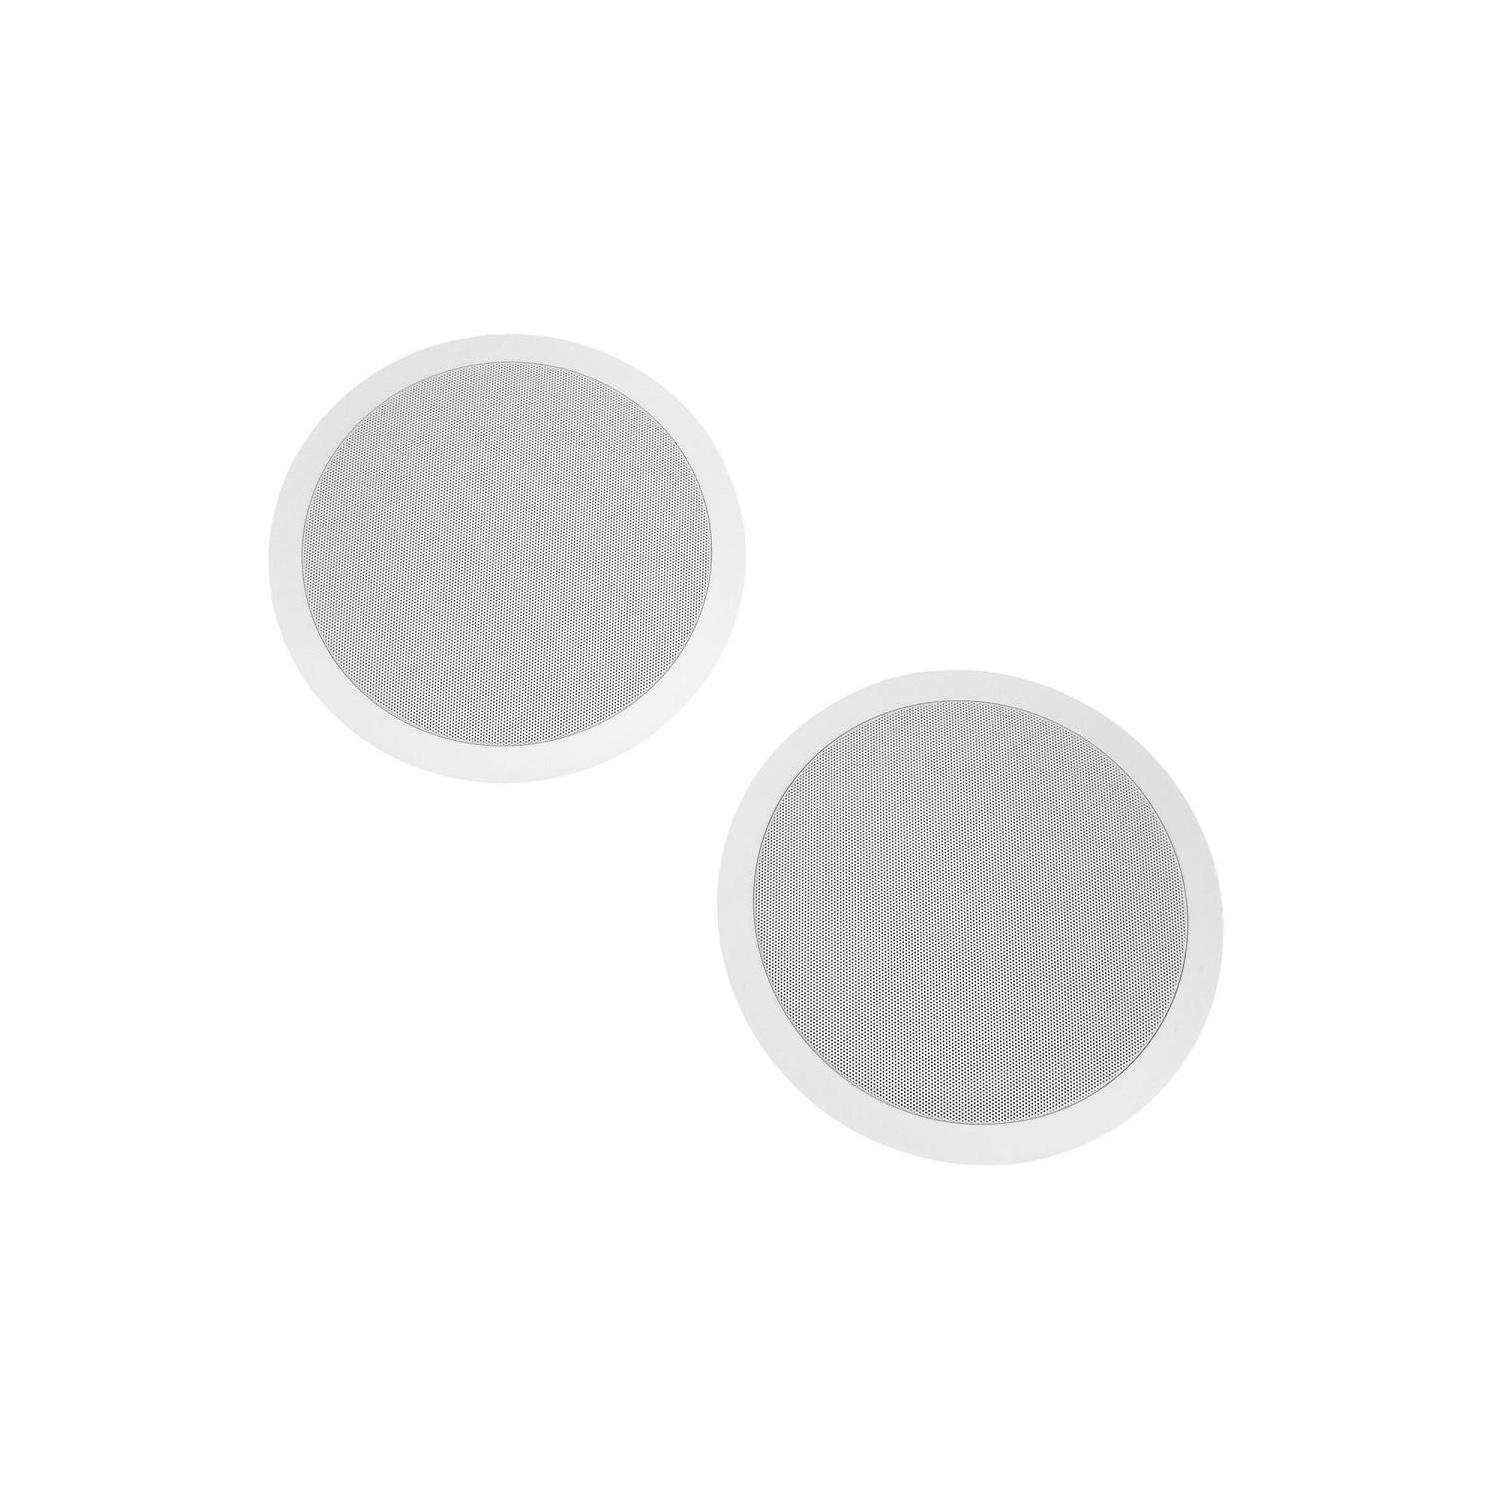 PO-RC80i Round in-ceiling speaker with 8-inch driver (pair).